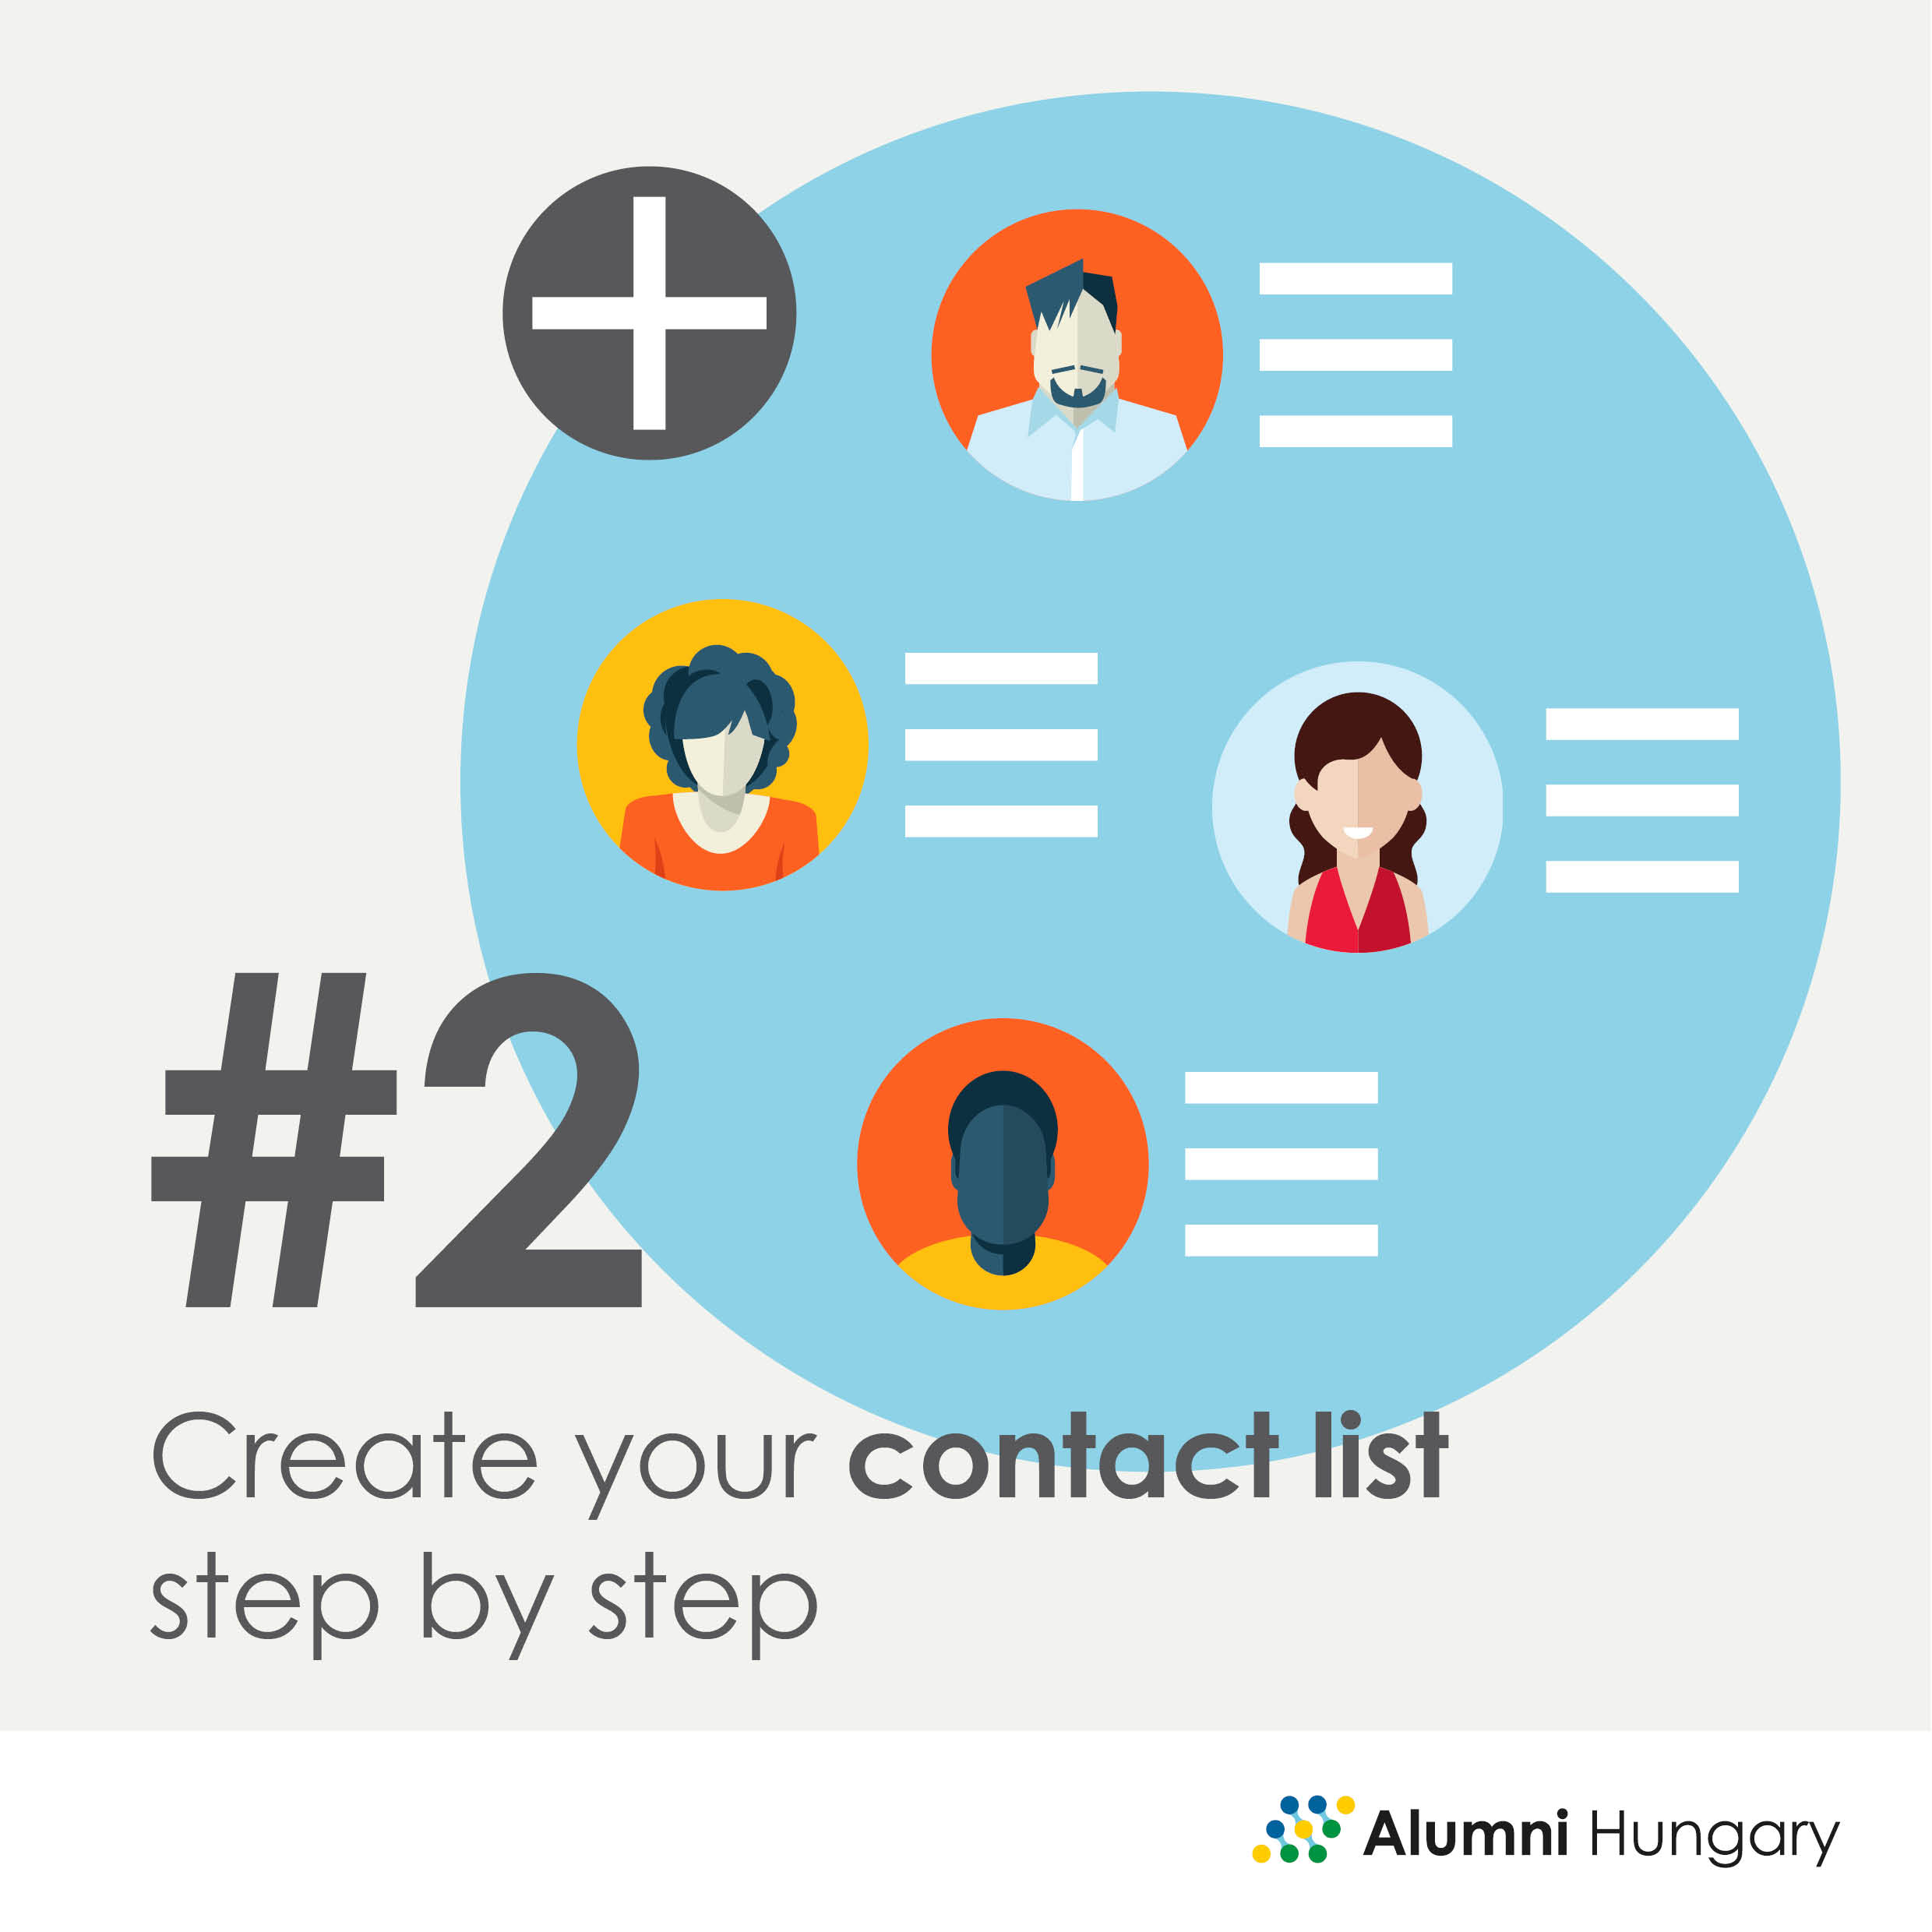 Create your contact list step by step